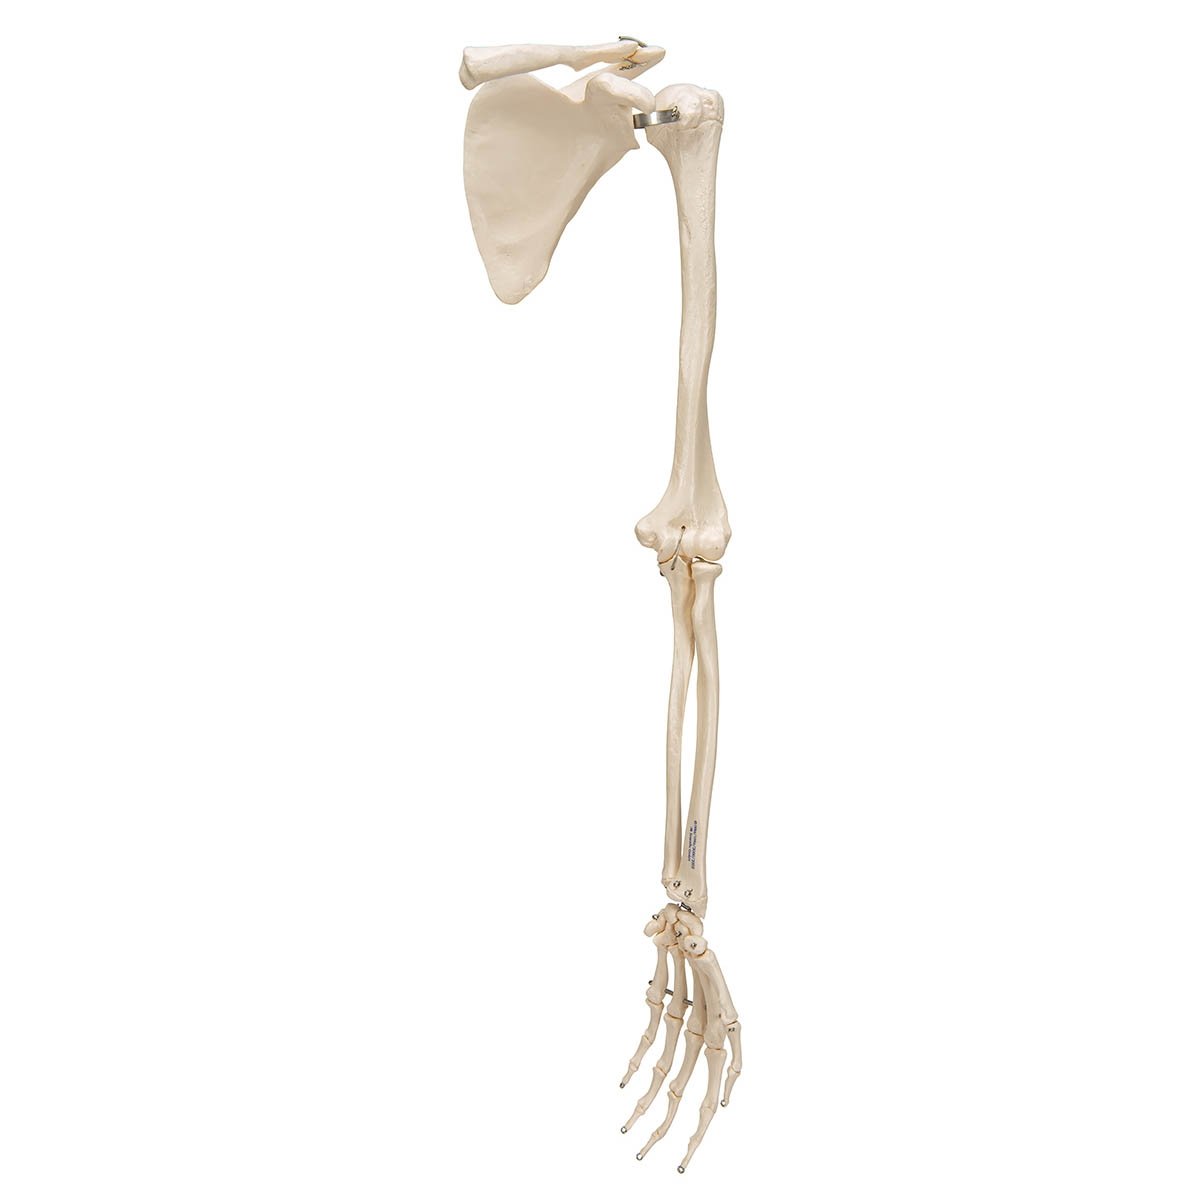 3B Scientific A46L Arm Skeleton with Scapula & Clavicle Model 3B Smart Anatomy